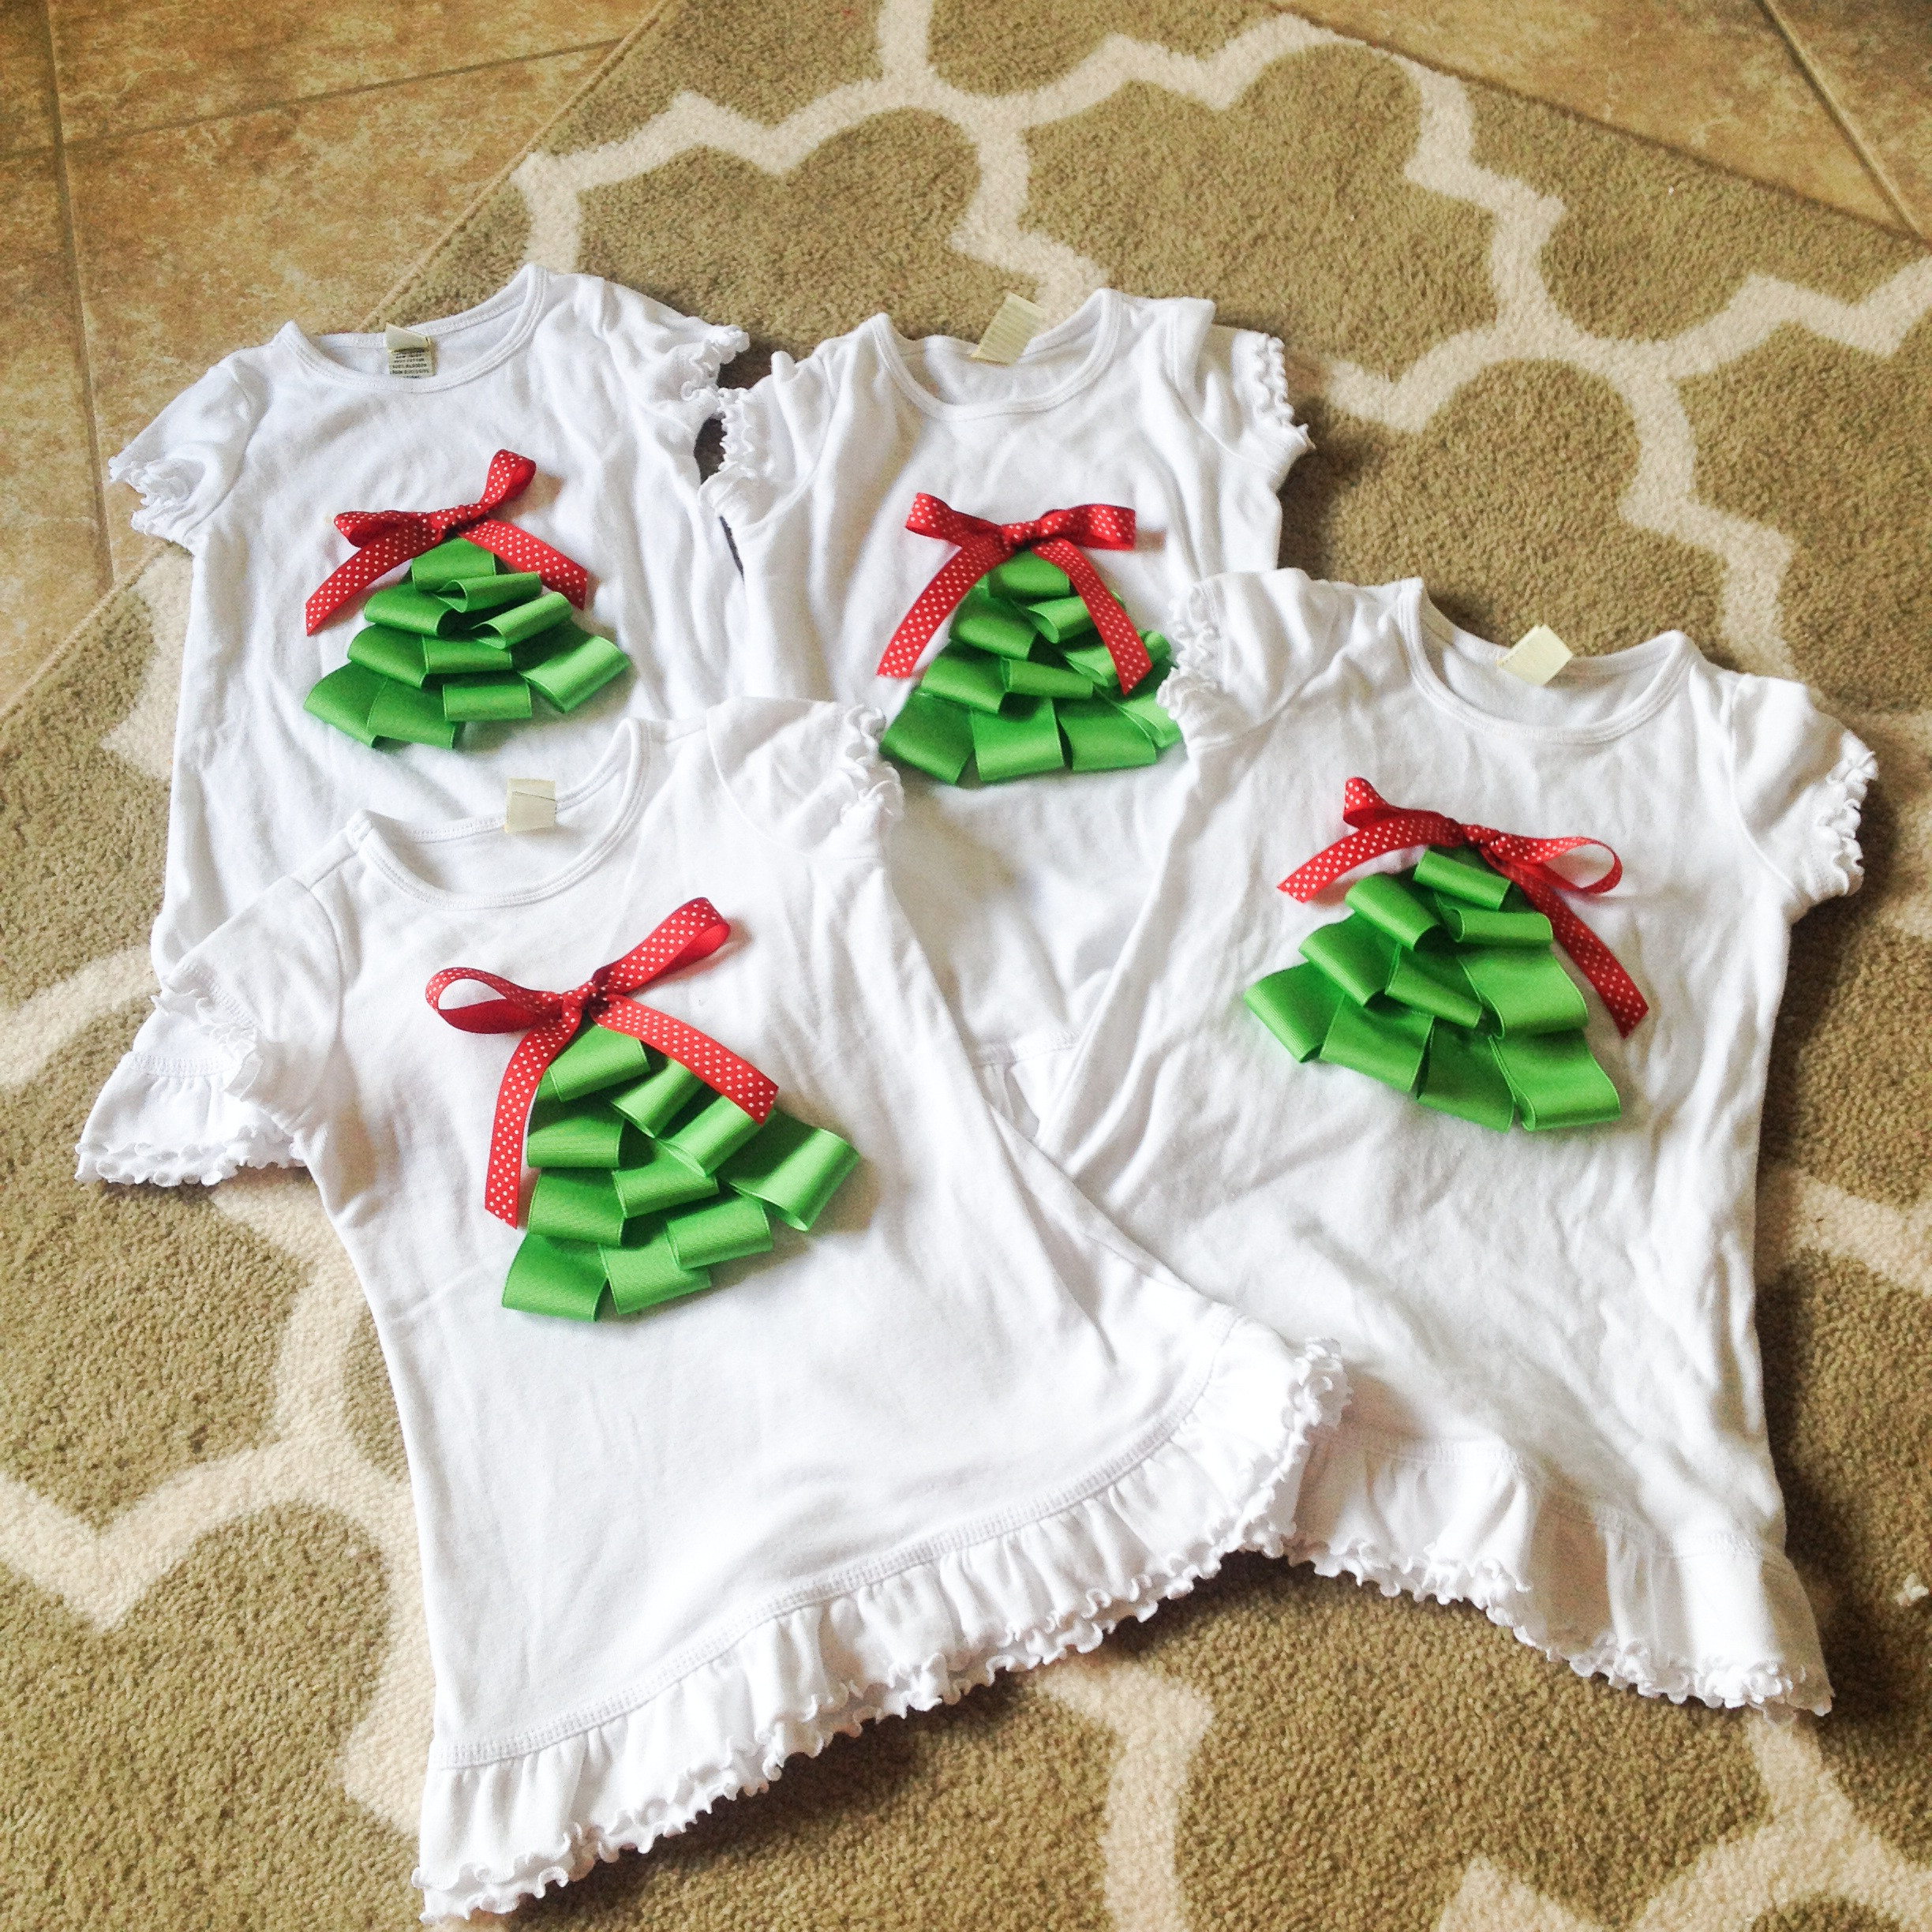 Best ideas about DIY Christmas Shirts
. Save or Pin DIY Christmas Tree Shirts Now.